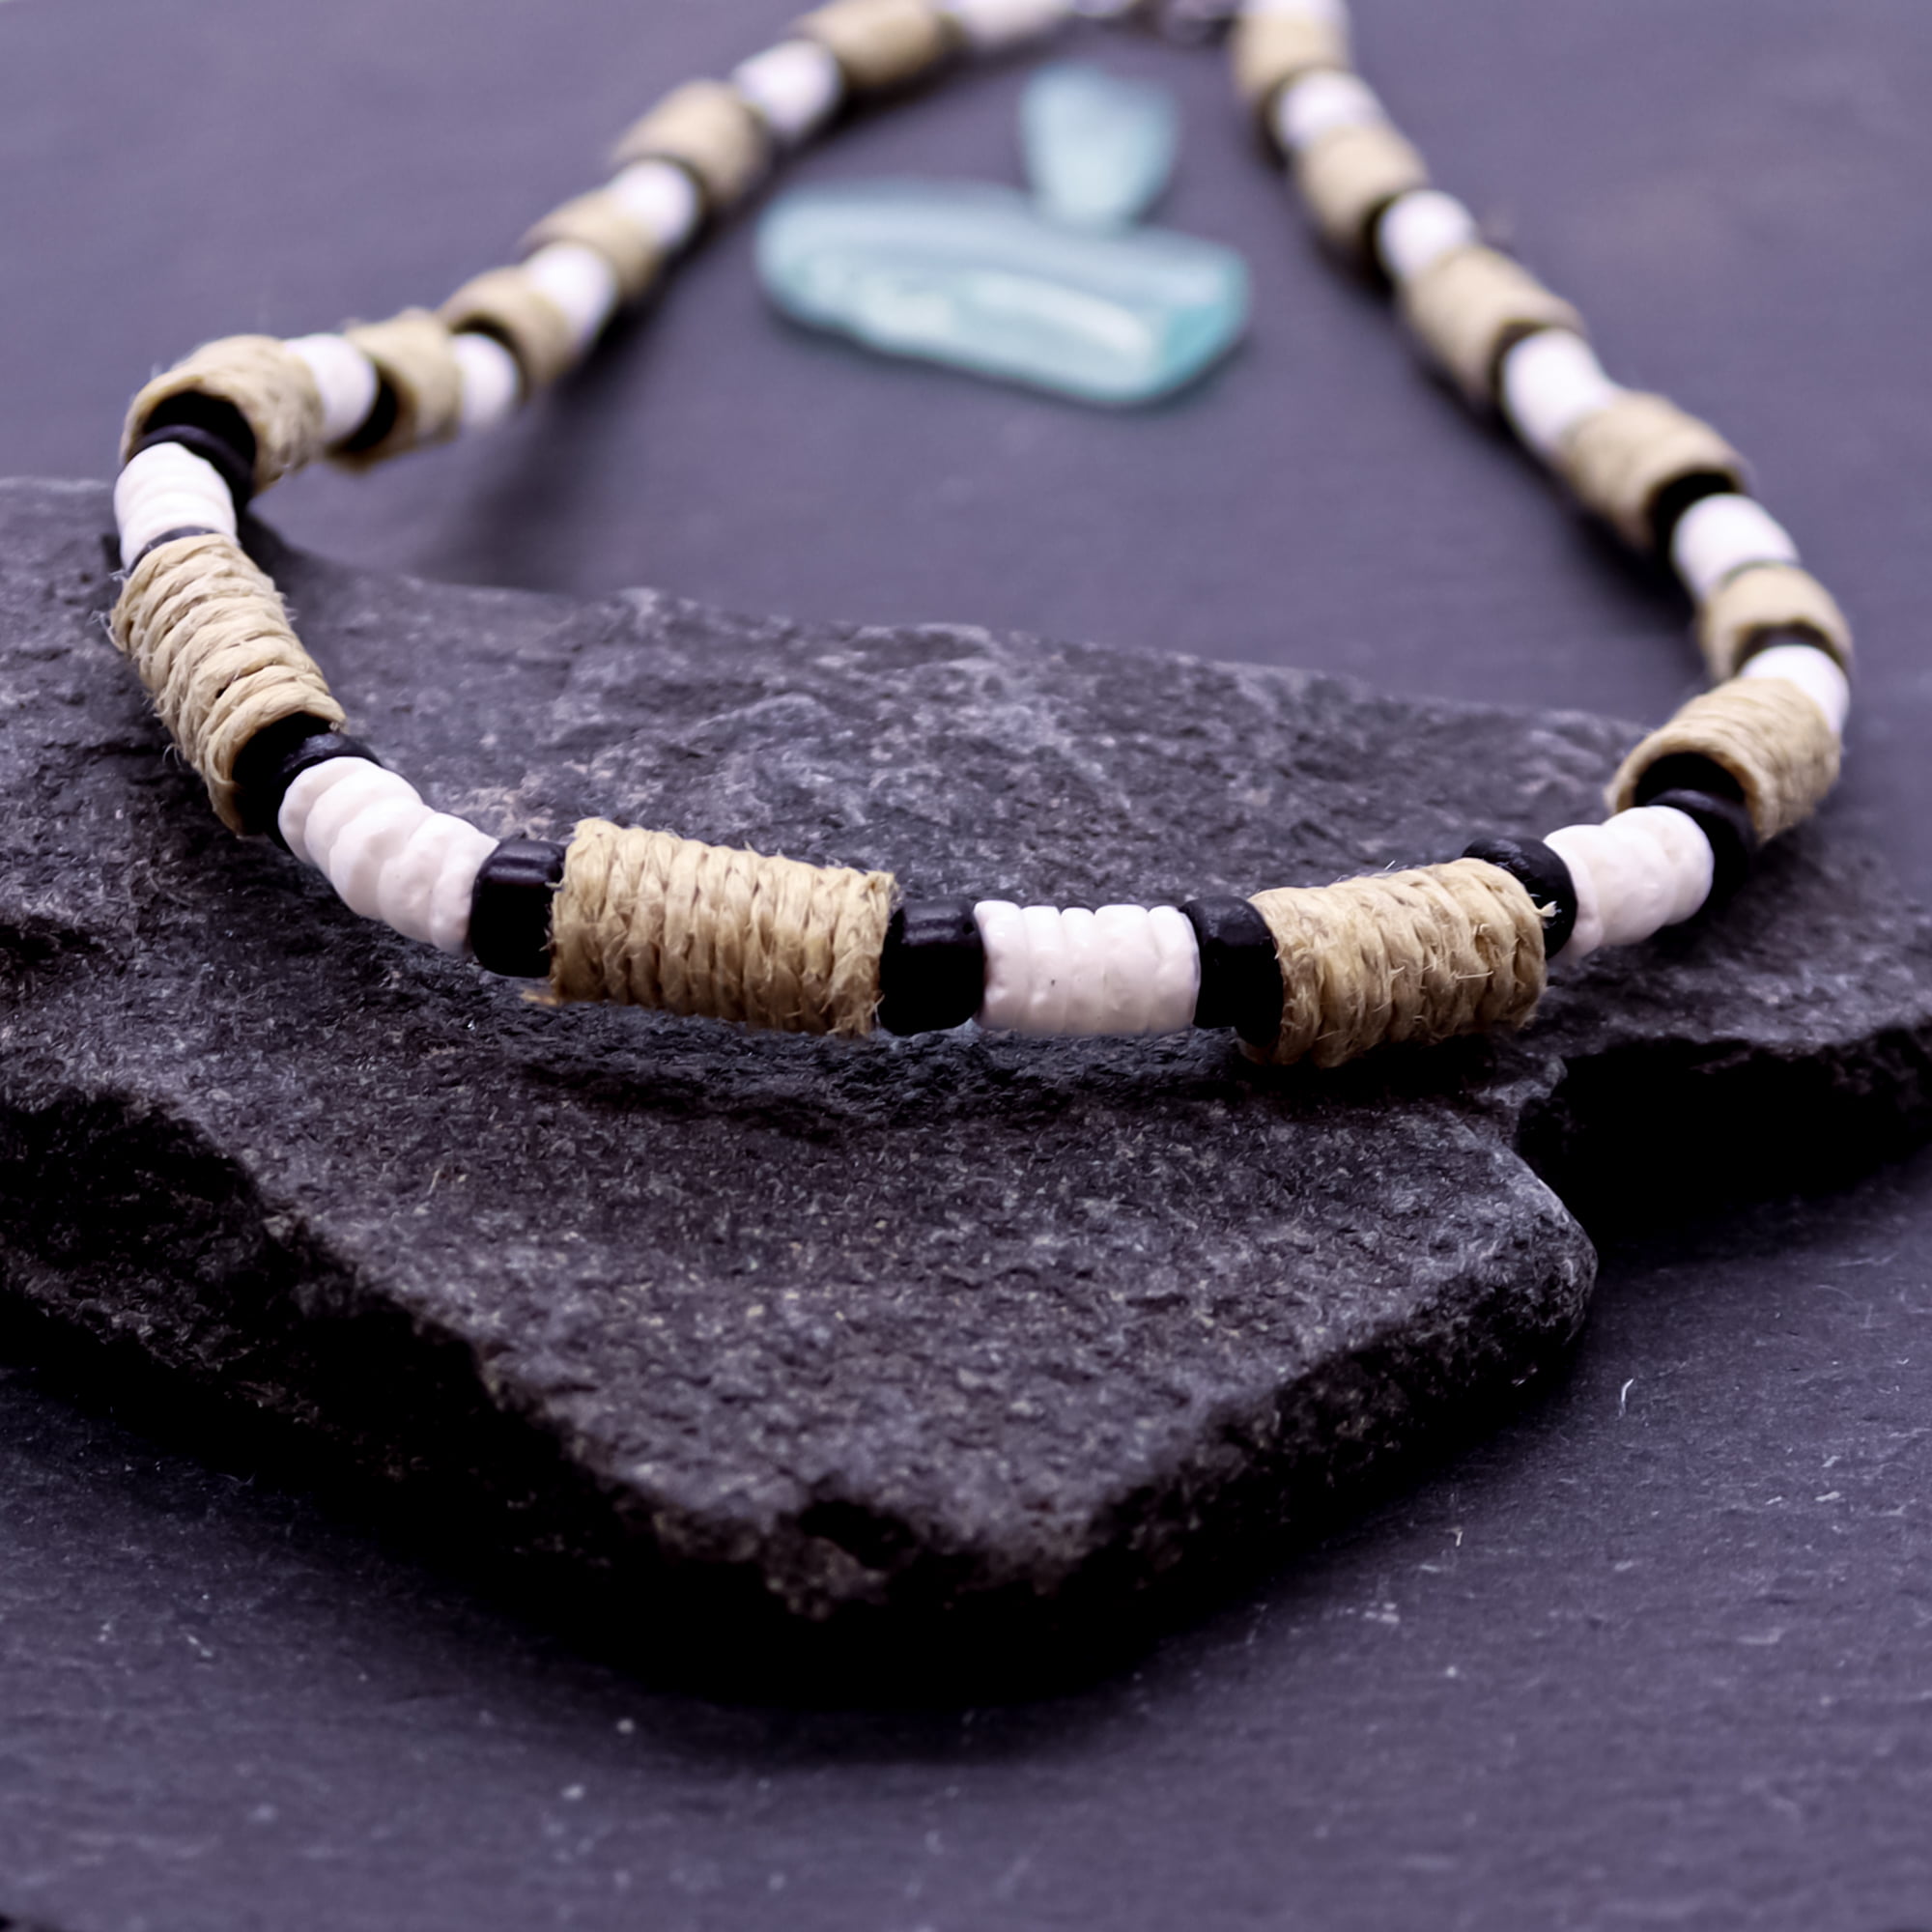 Wave Surfer Coconut Shell Necklace – Shop One Heart